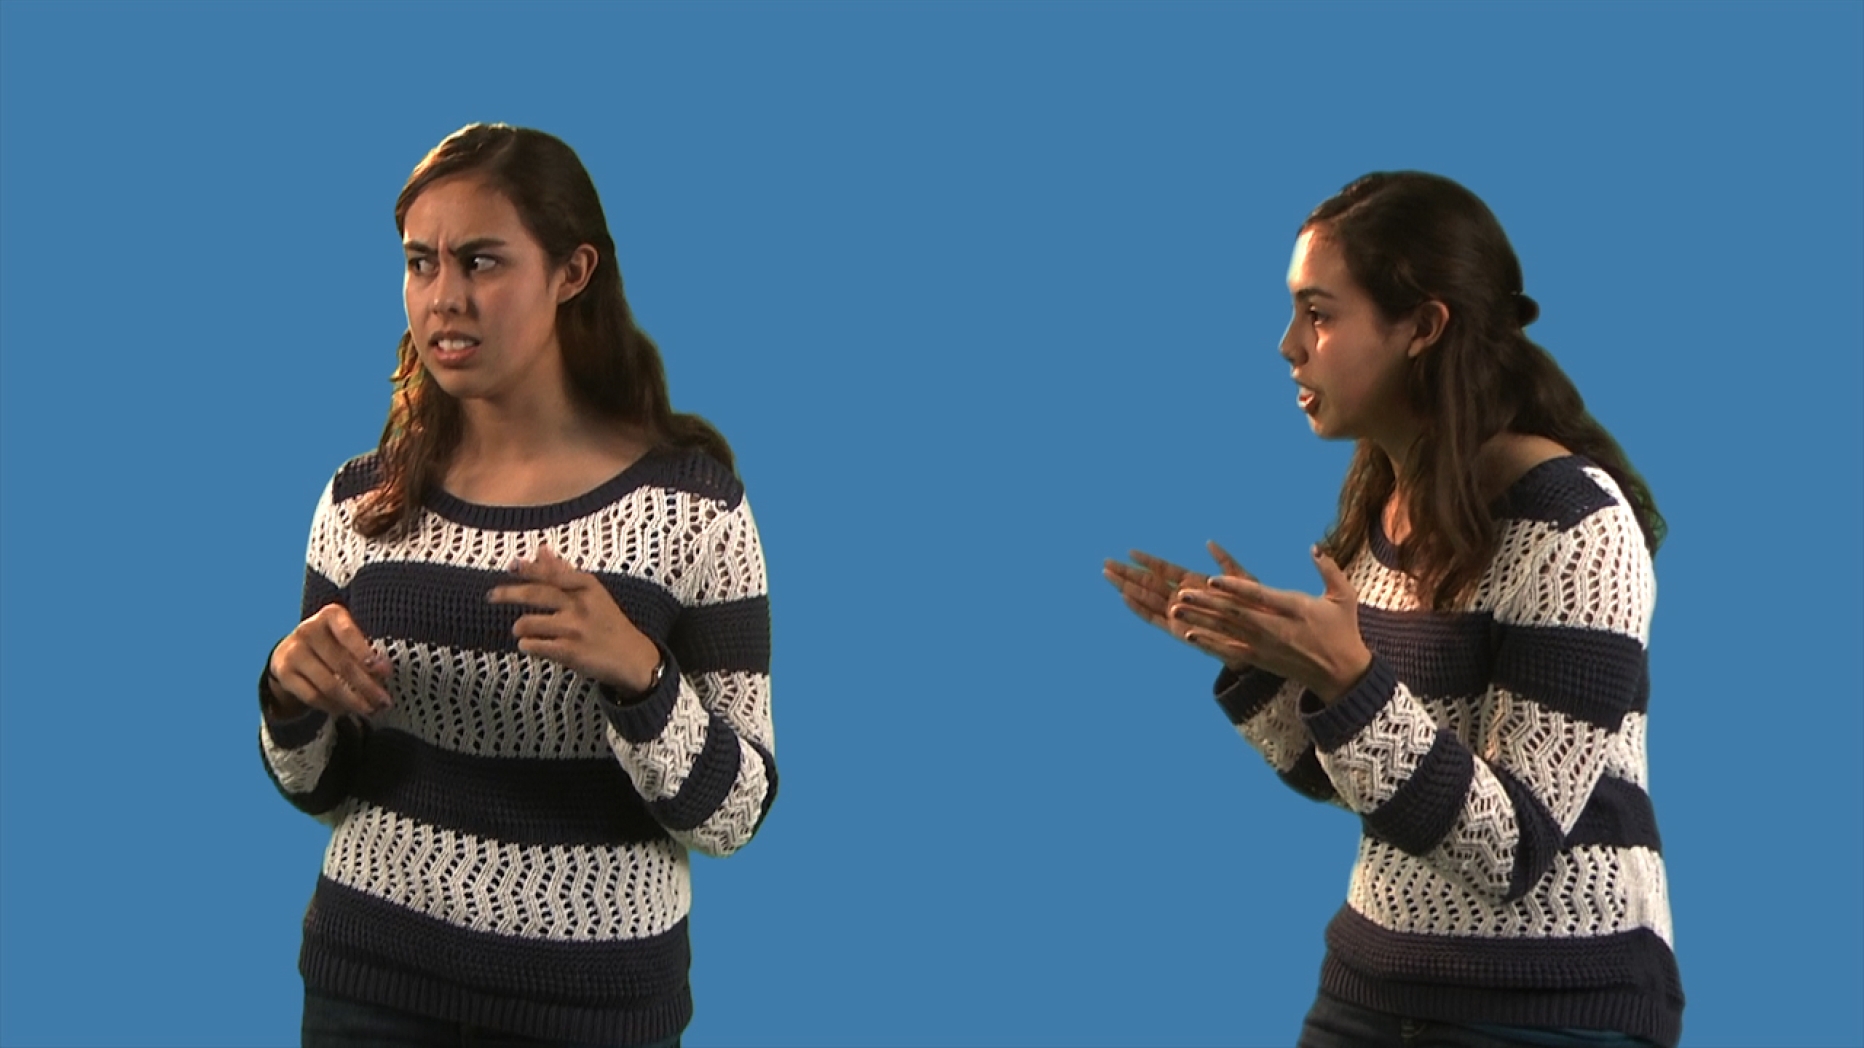 The same woman standing in front of a blue screen from two different angles.